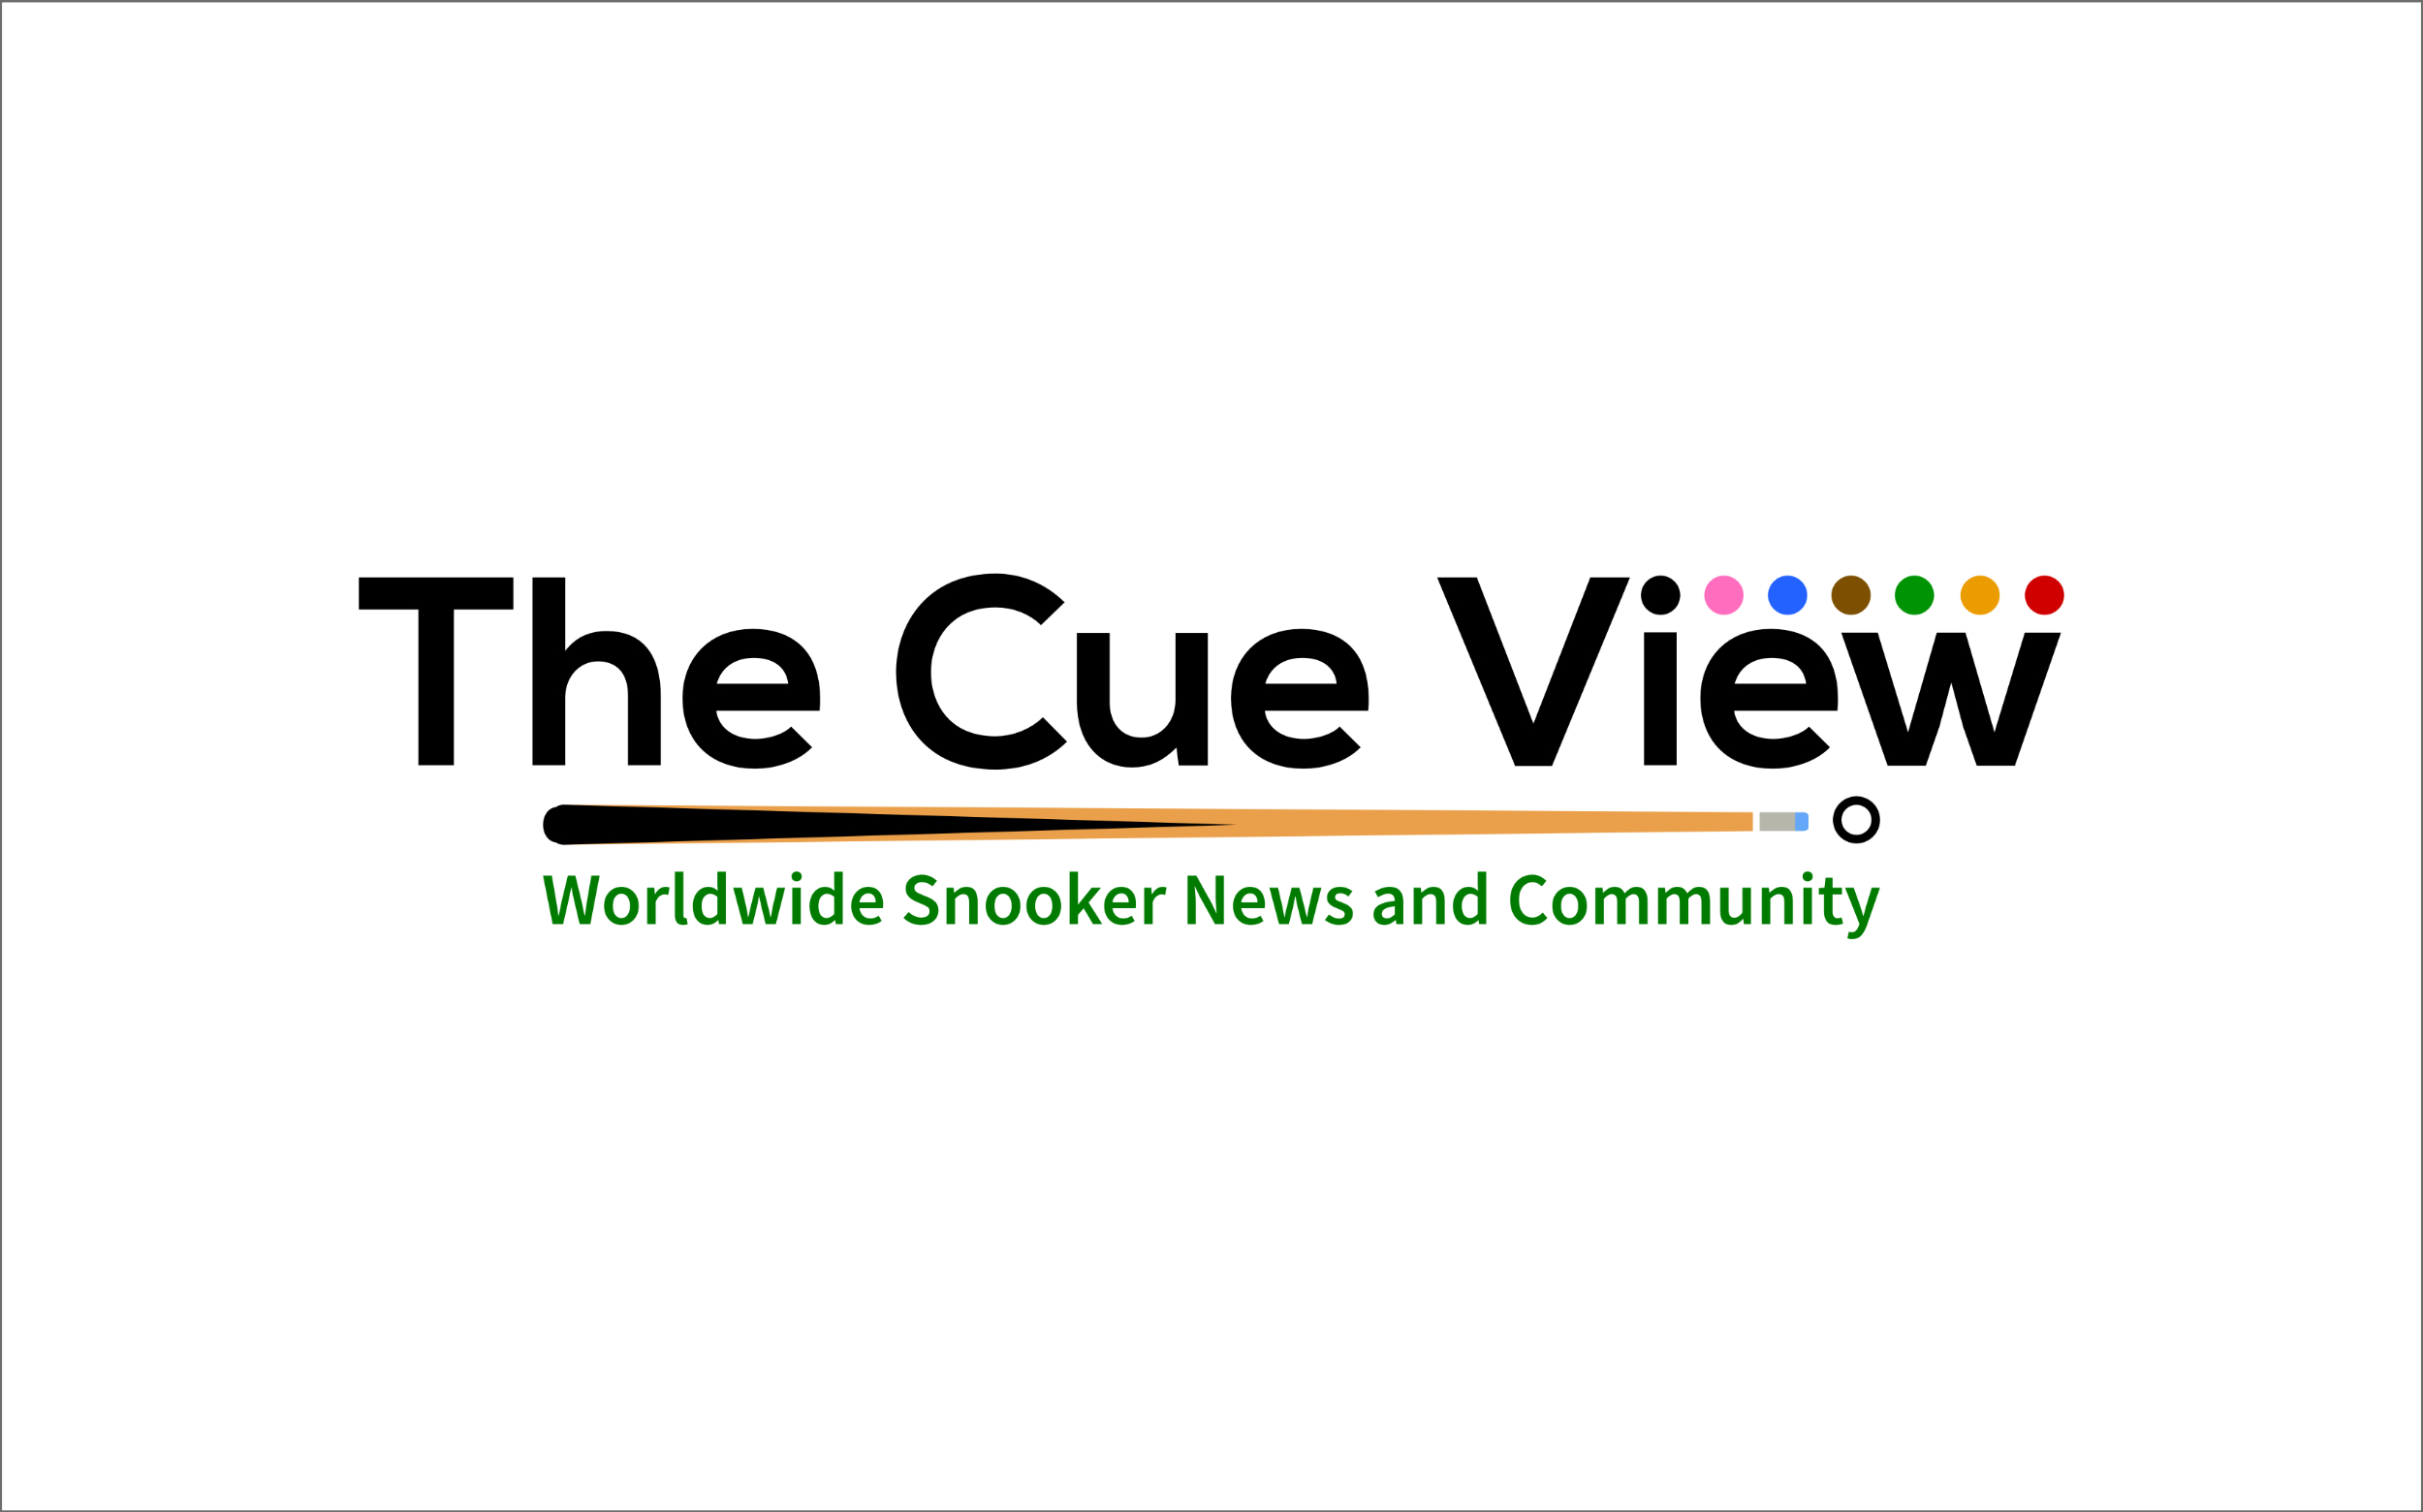 Logo Design for The Cue View.  Made by Jon Glanville - Plymouth Graphic Designer.